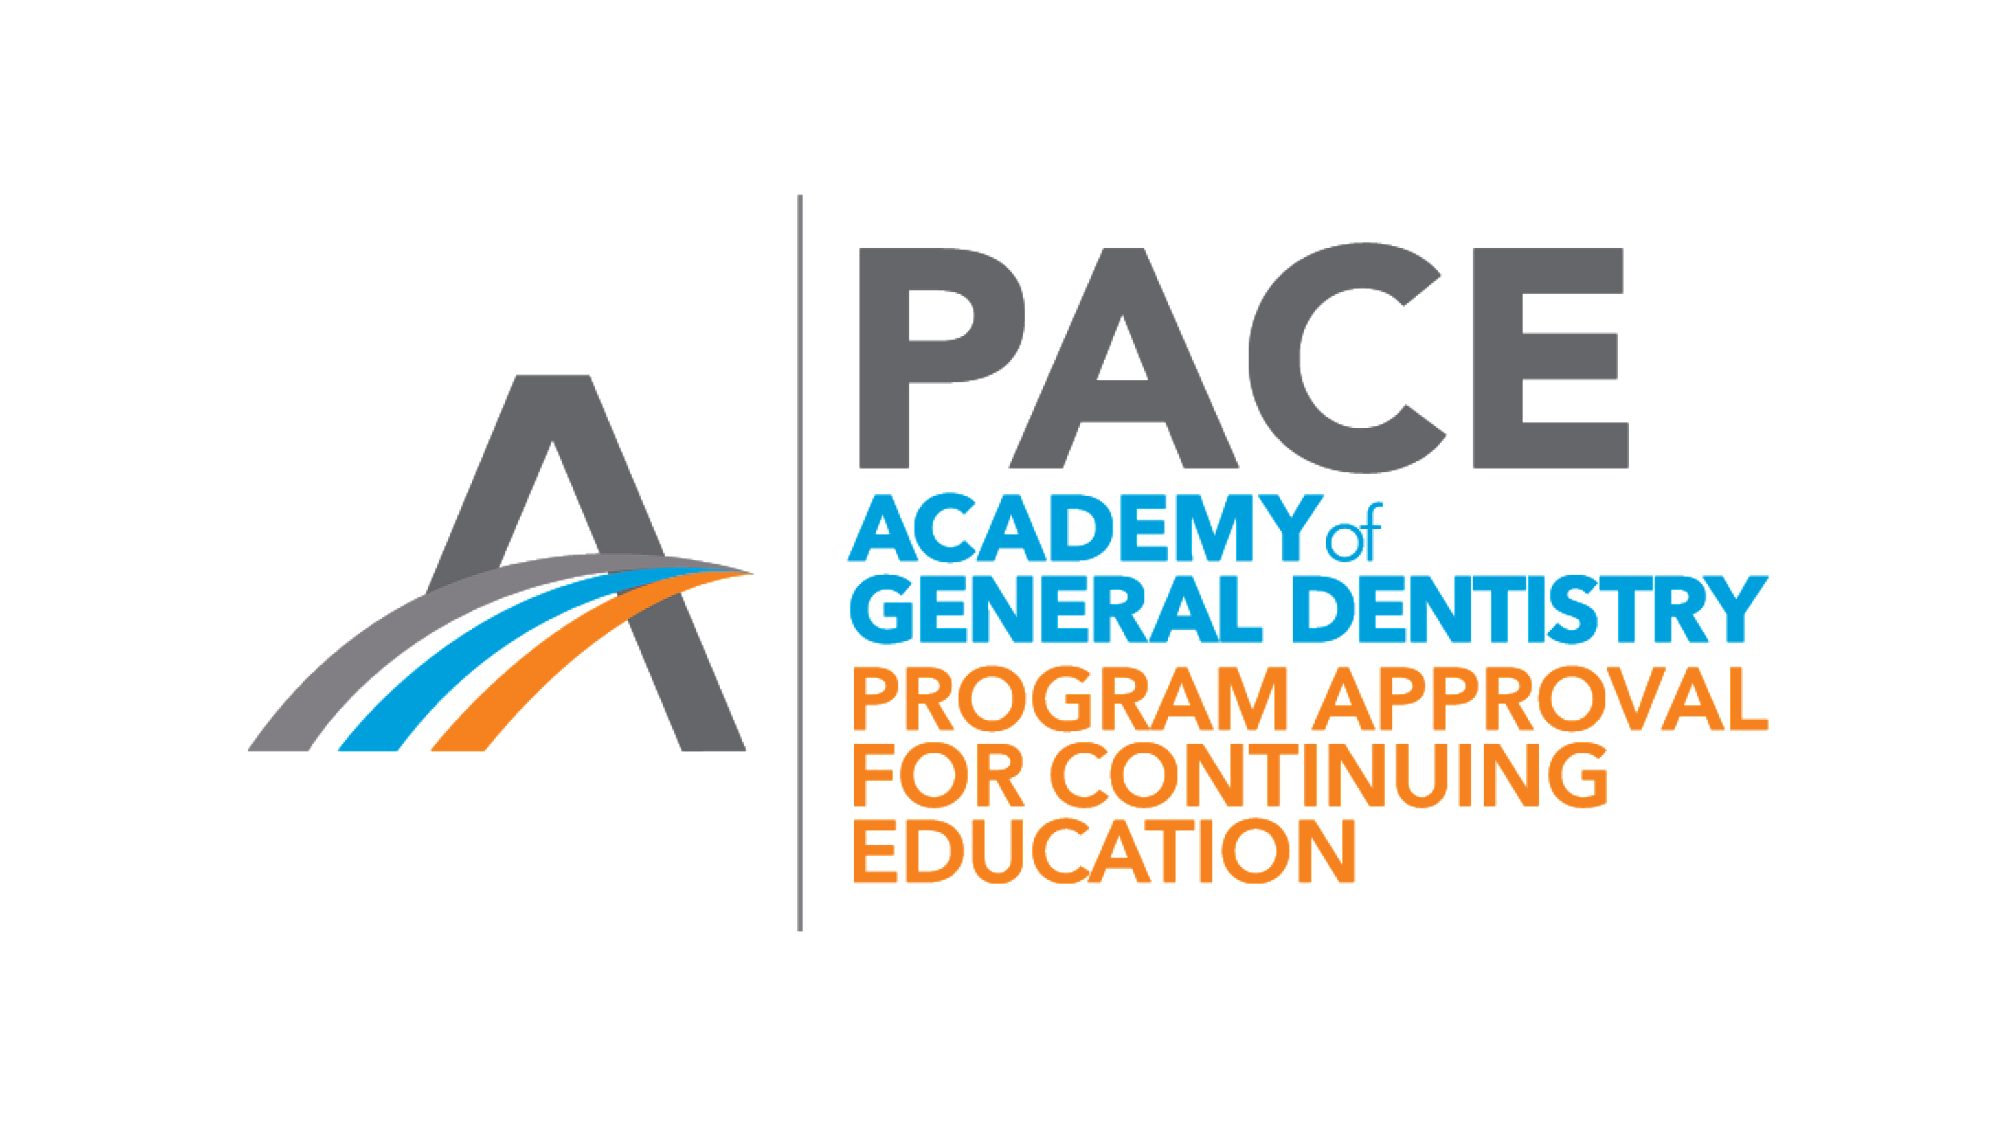 AGD PACE full-color logo